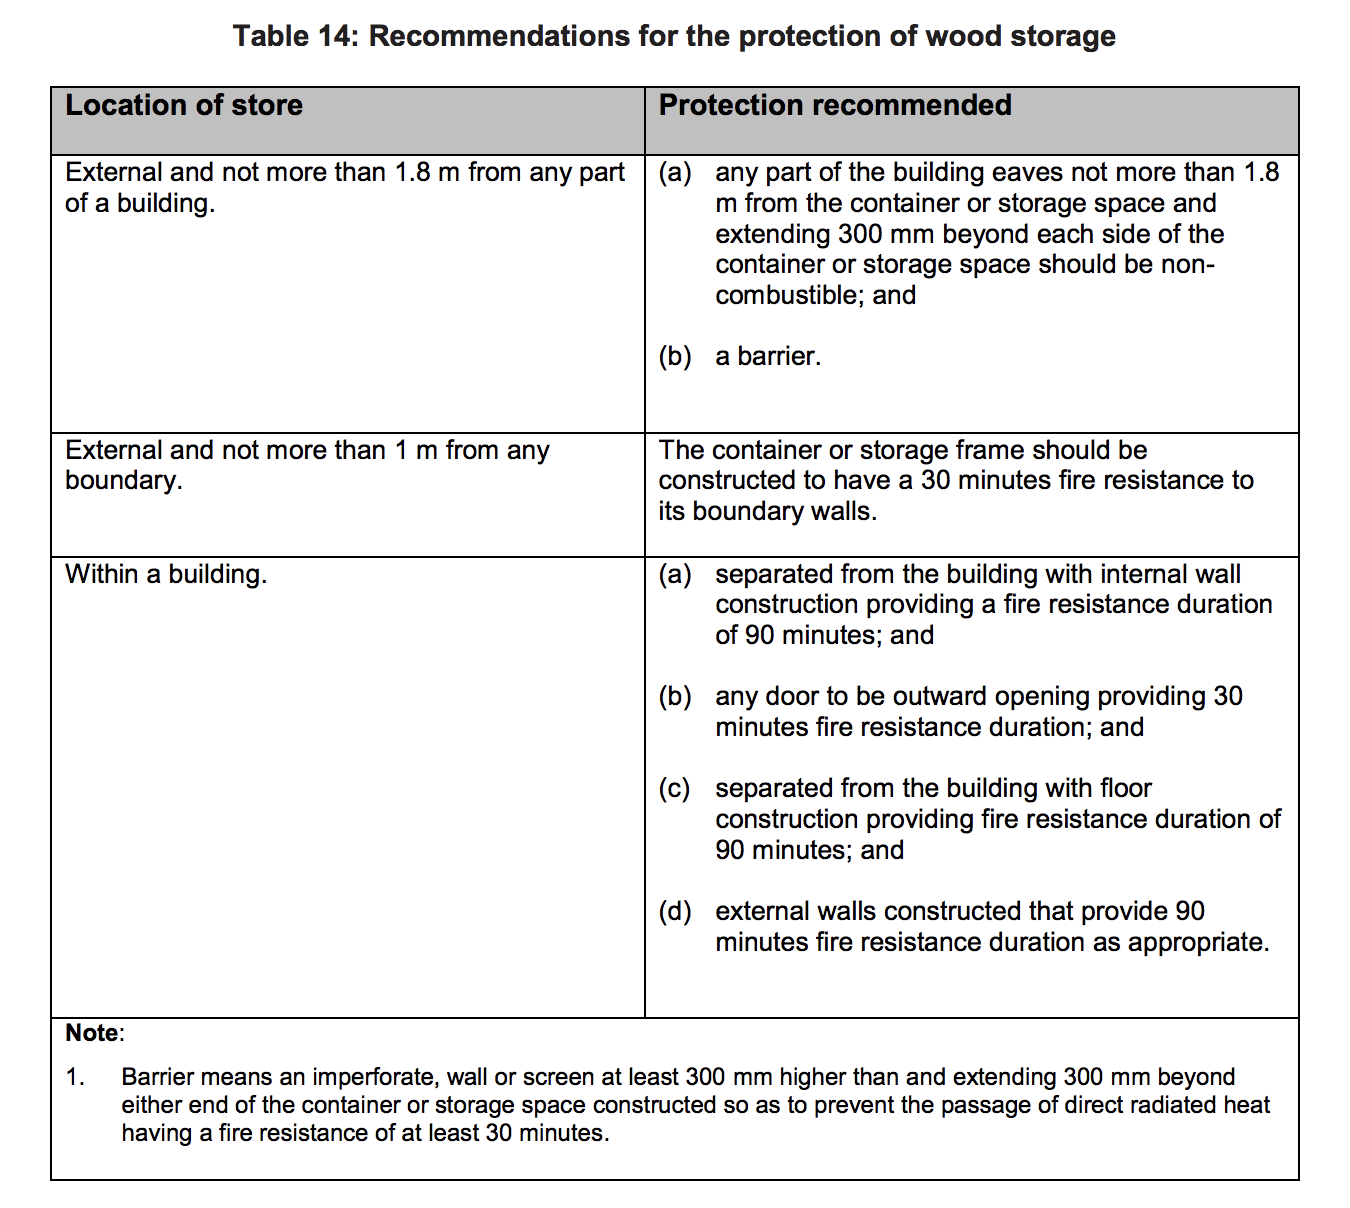 Table HJ14 - Recommendations for the protection of wood storage - Extract from TGD J